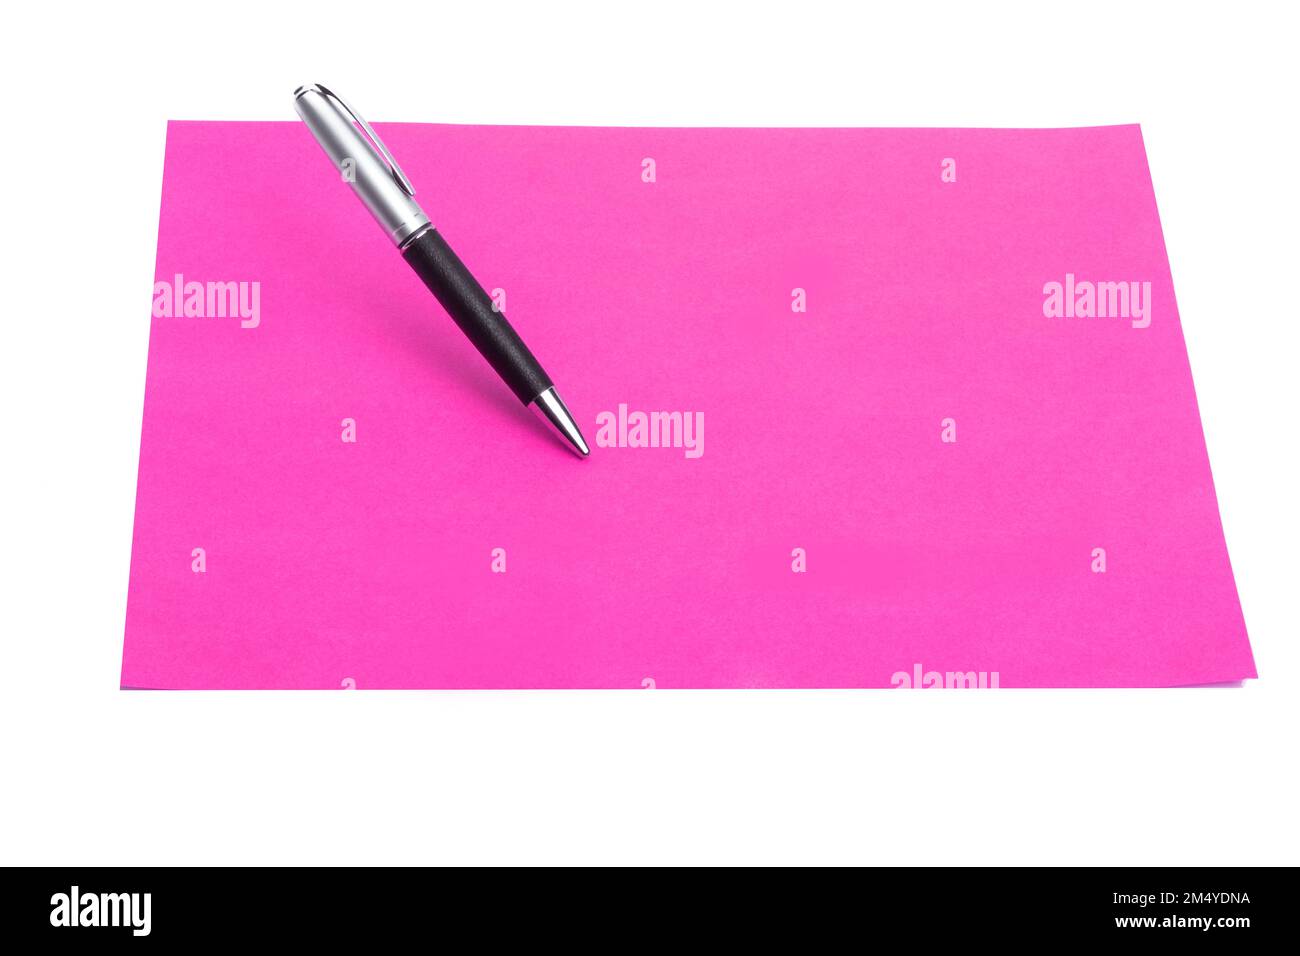 Pen and plain color paper on an isolated background Stock Photo